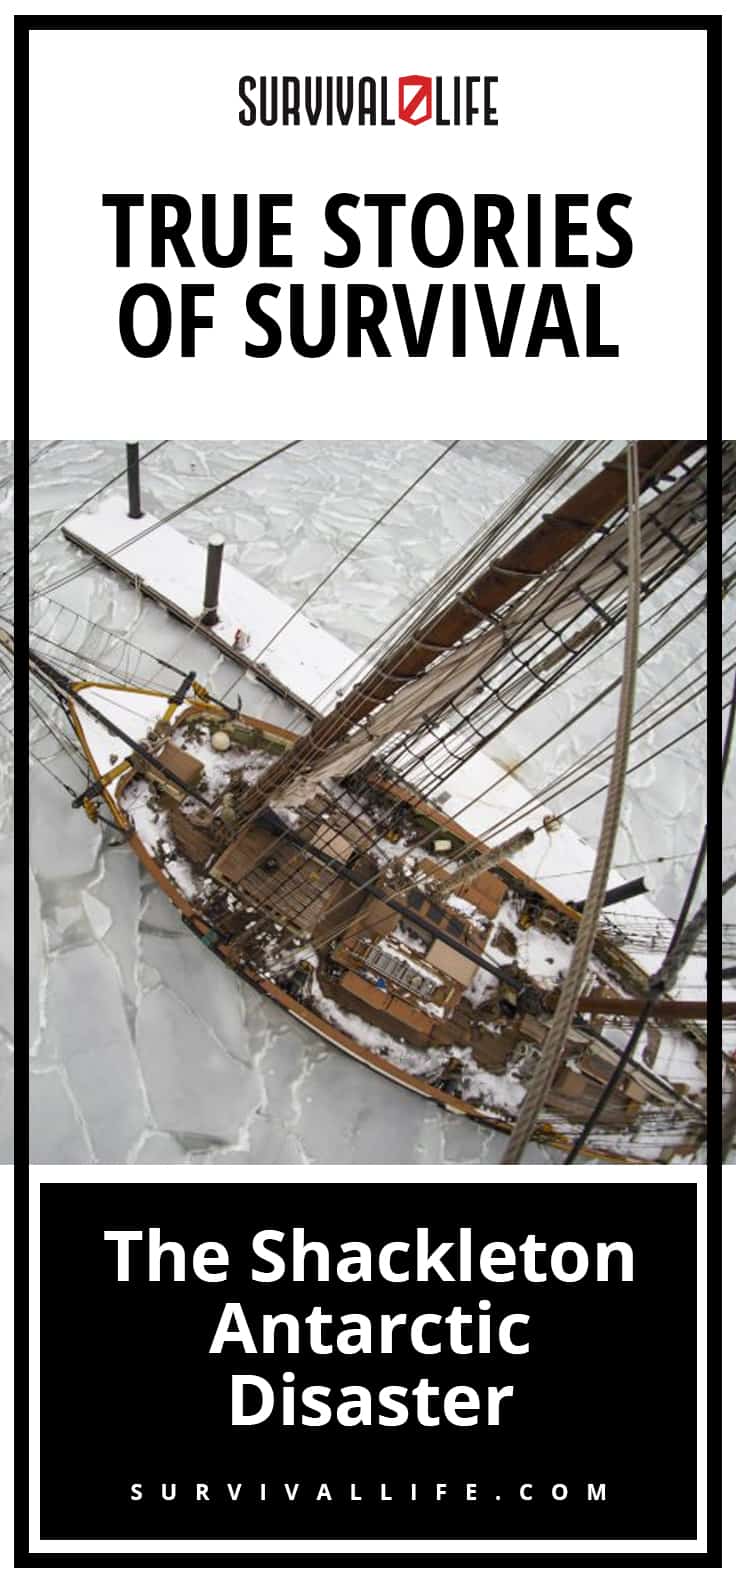 True Stories Of Survival: The Shackleton Antarctic Disaster